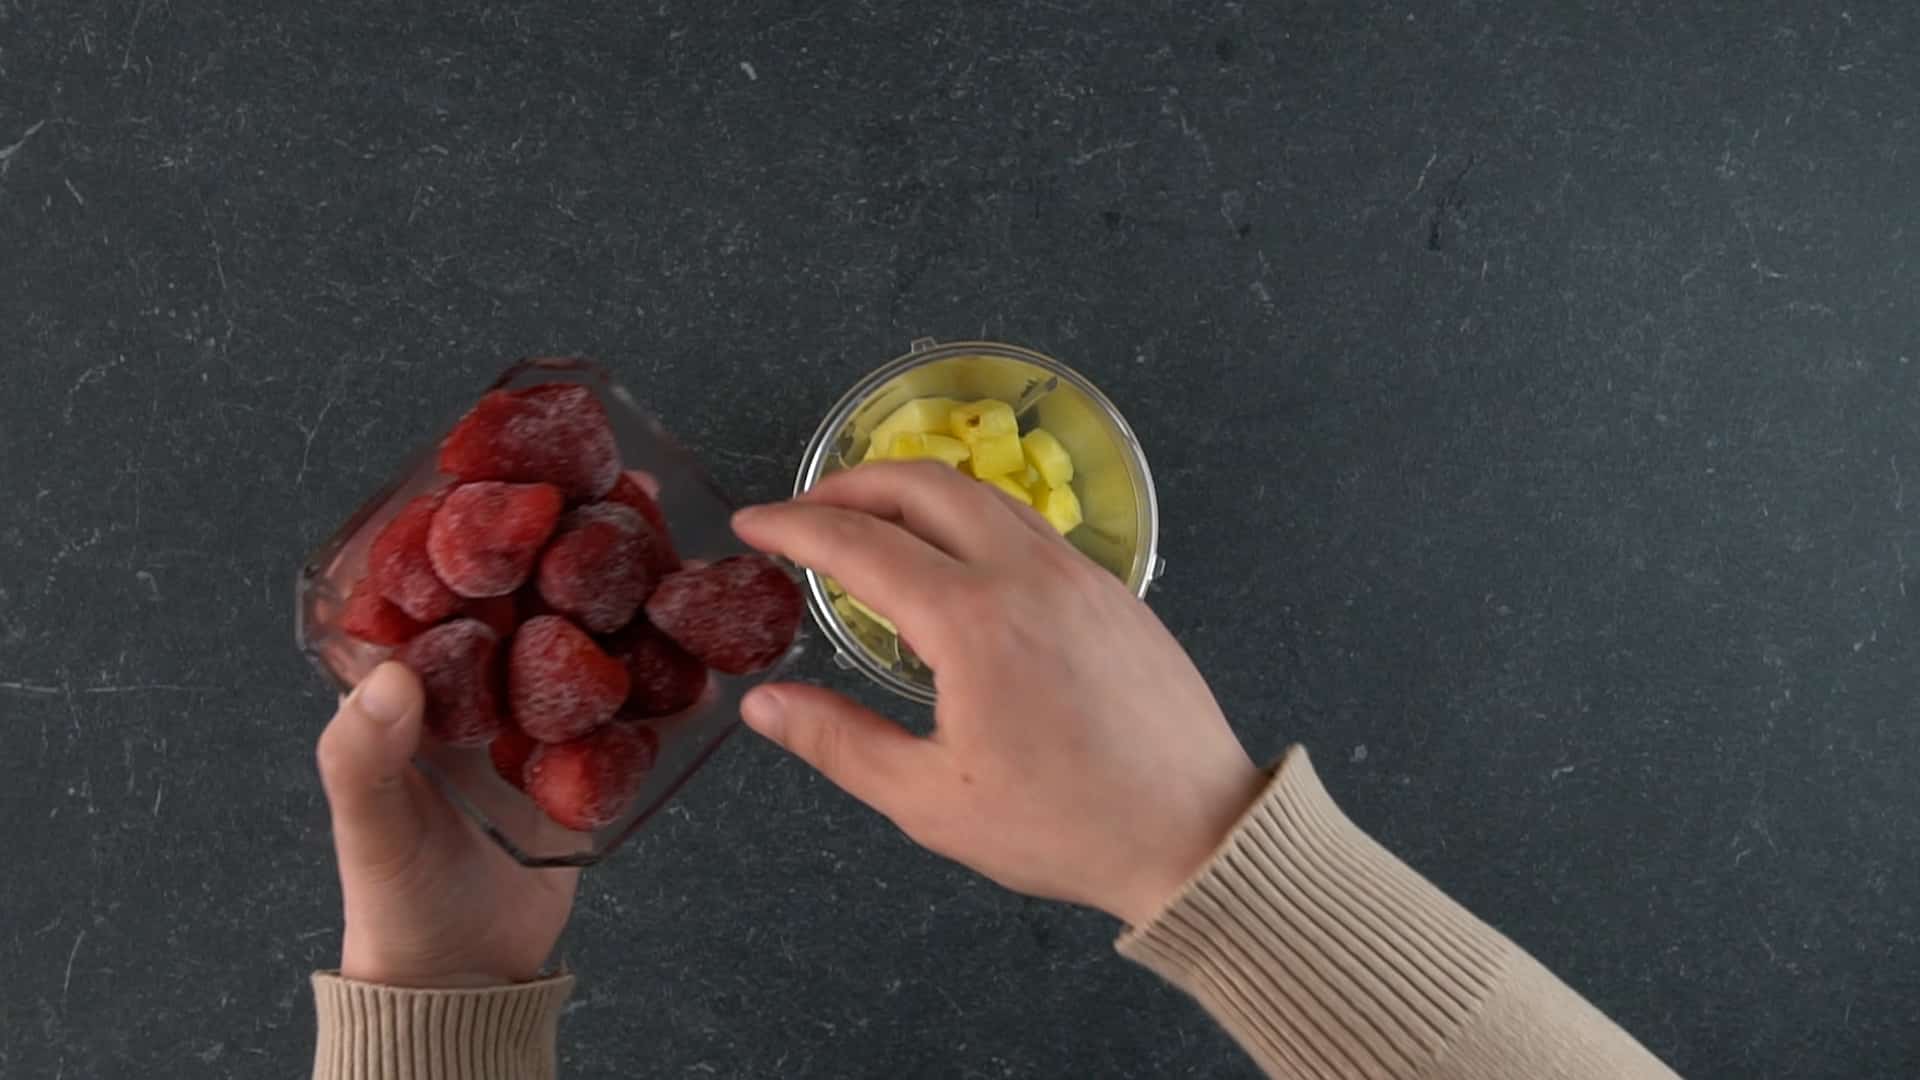 Hands holding a bowl of strawberries over a blender.